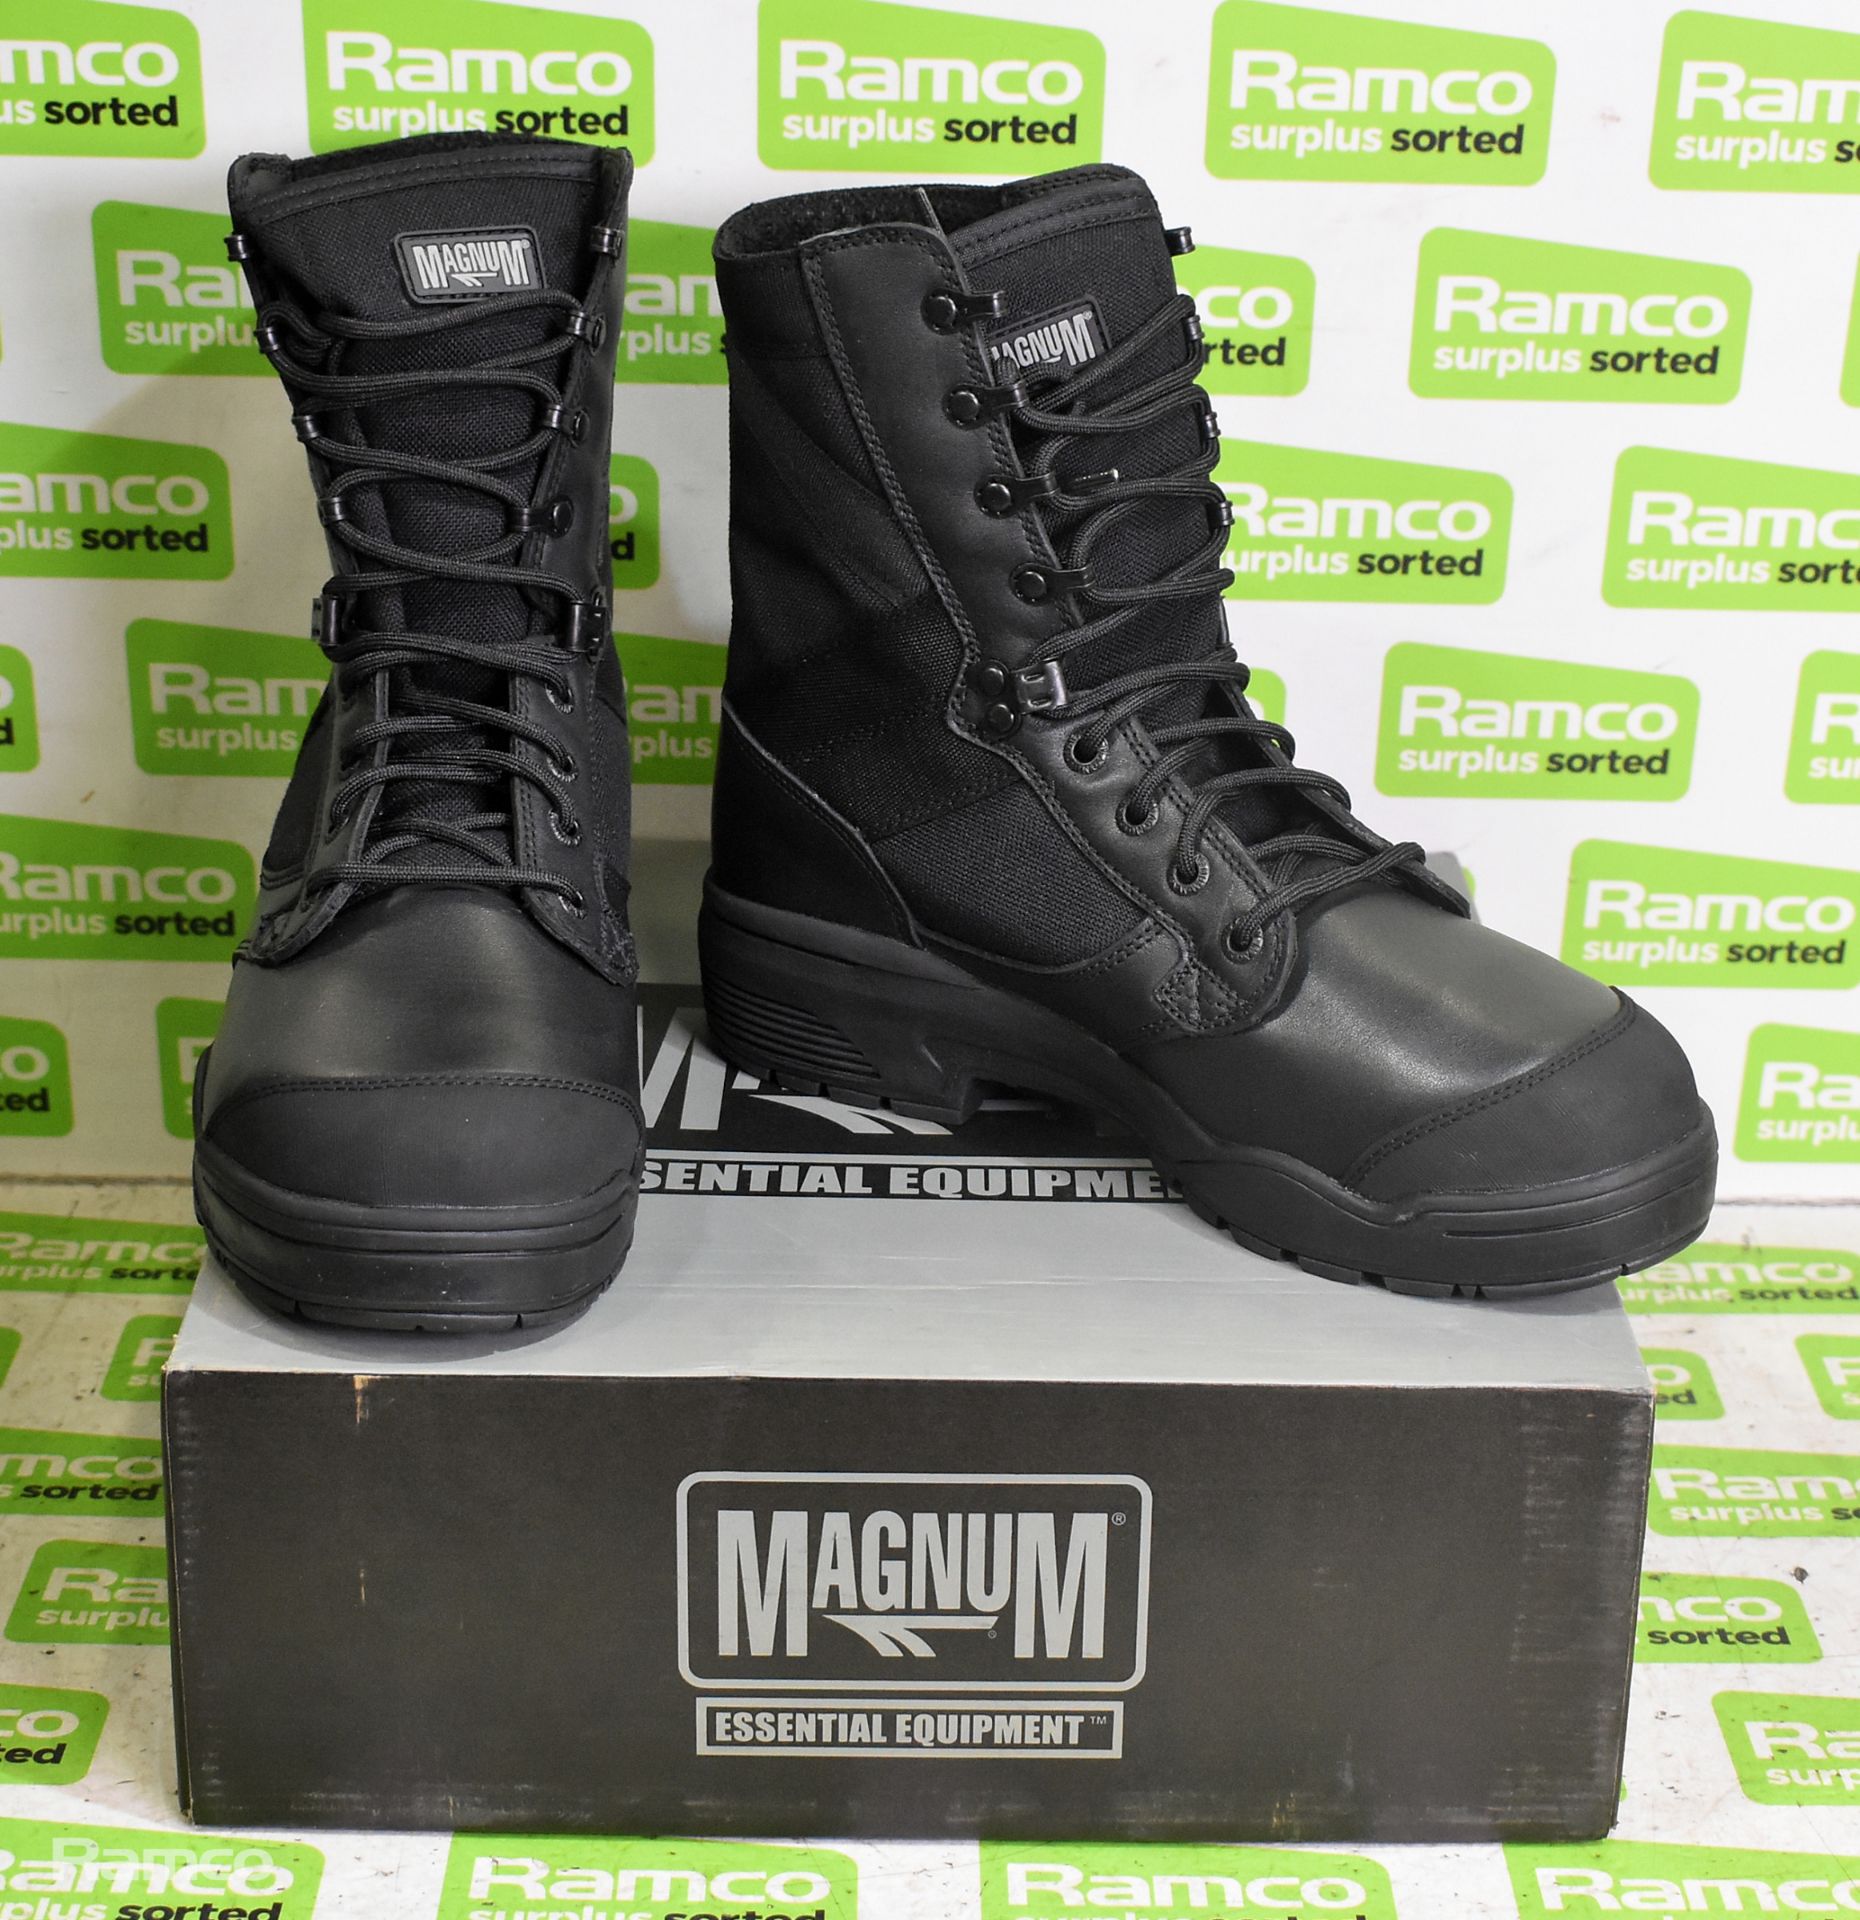 5x pairs of Magnum hot weather boots - Size 6M